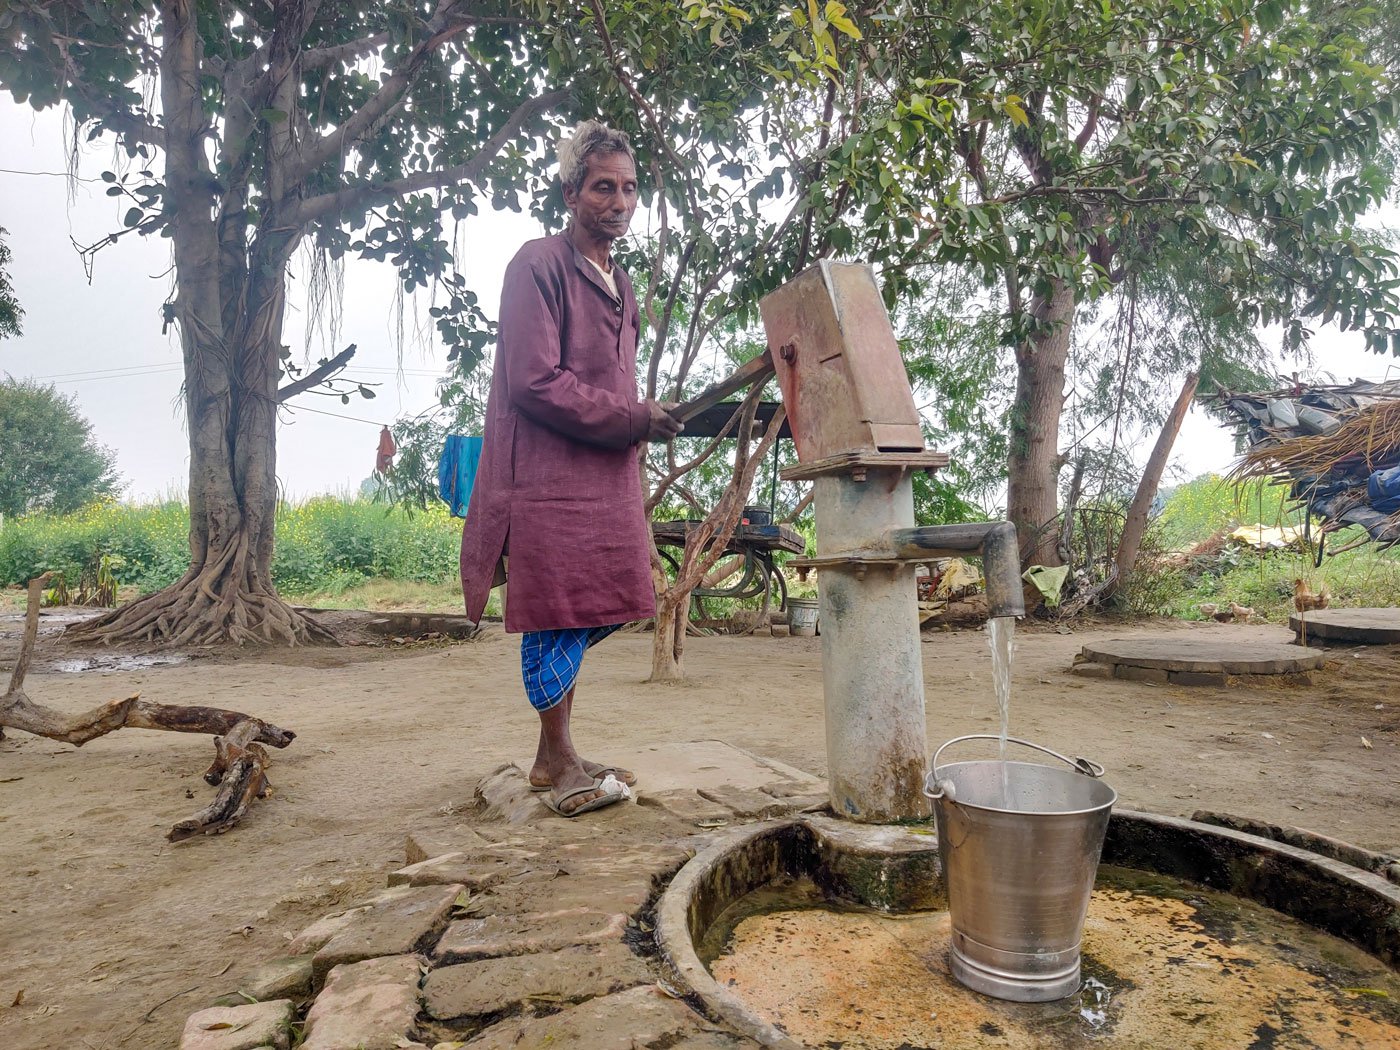 Lullur, Shanti's father-in-law, pumping water at the hand pump outside their home